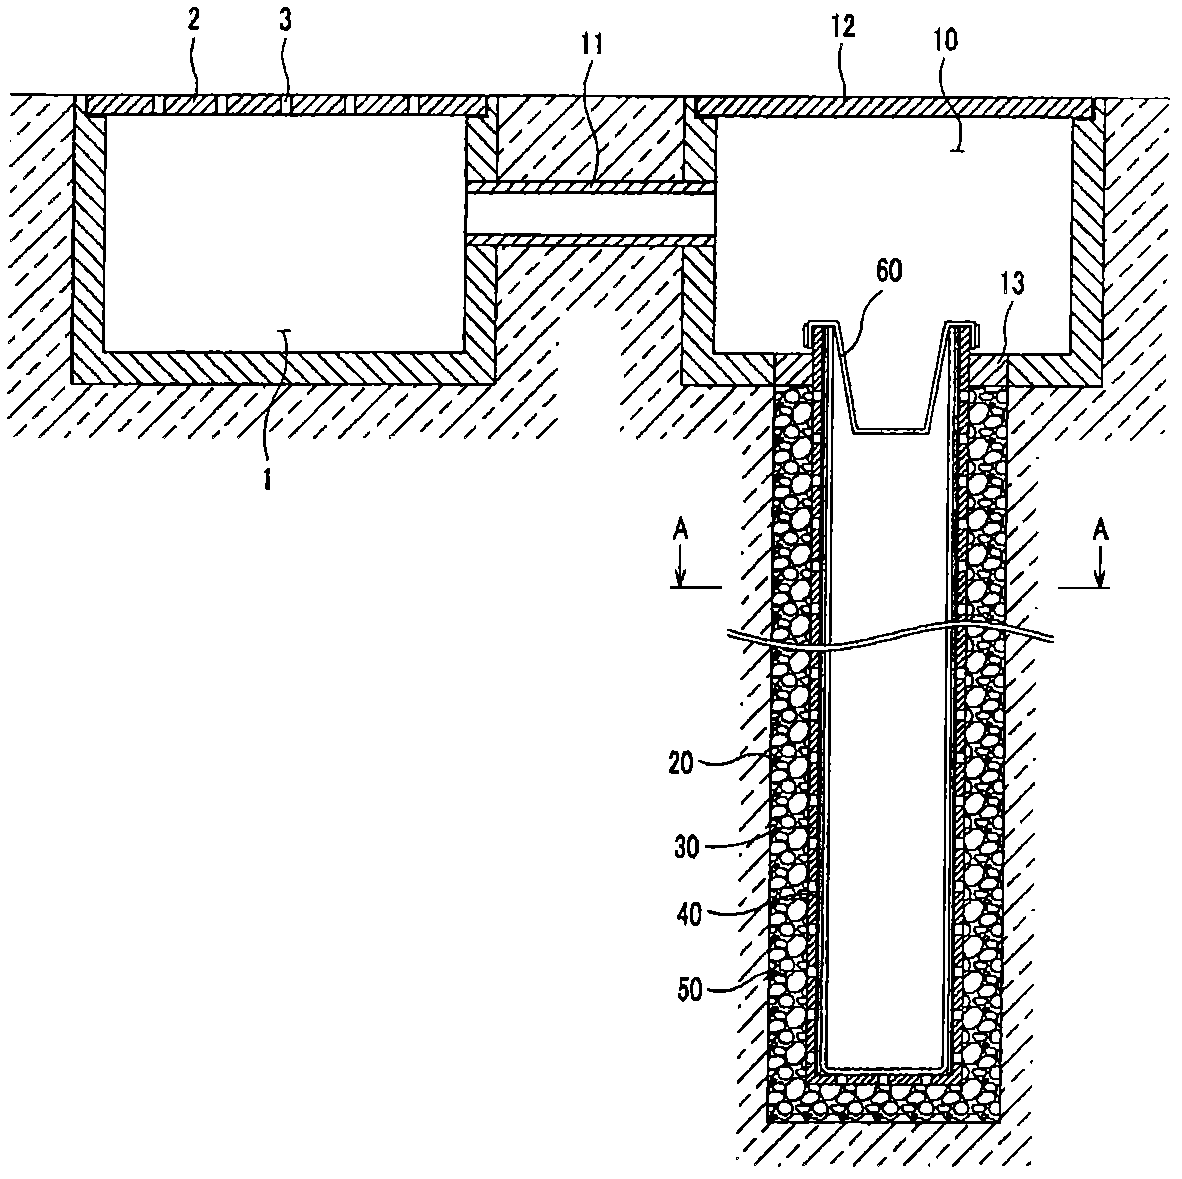 Water pocket using a percolation well for the in-ground storage of percolated rainwater